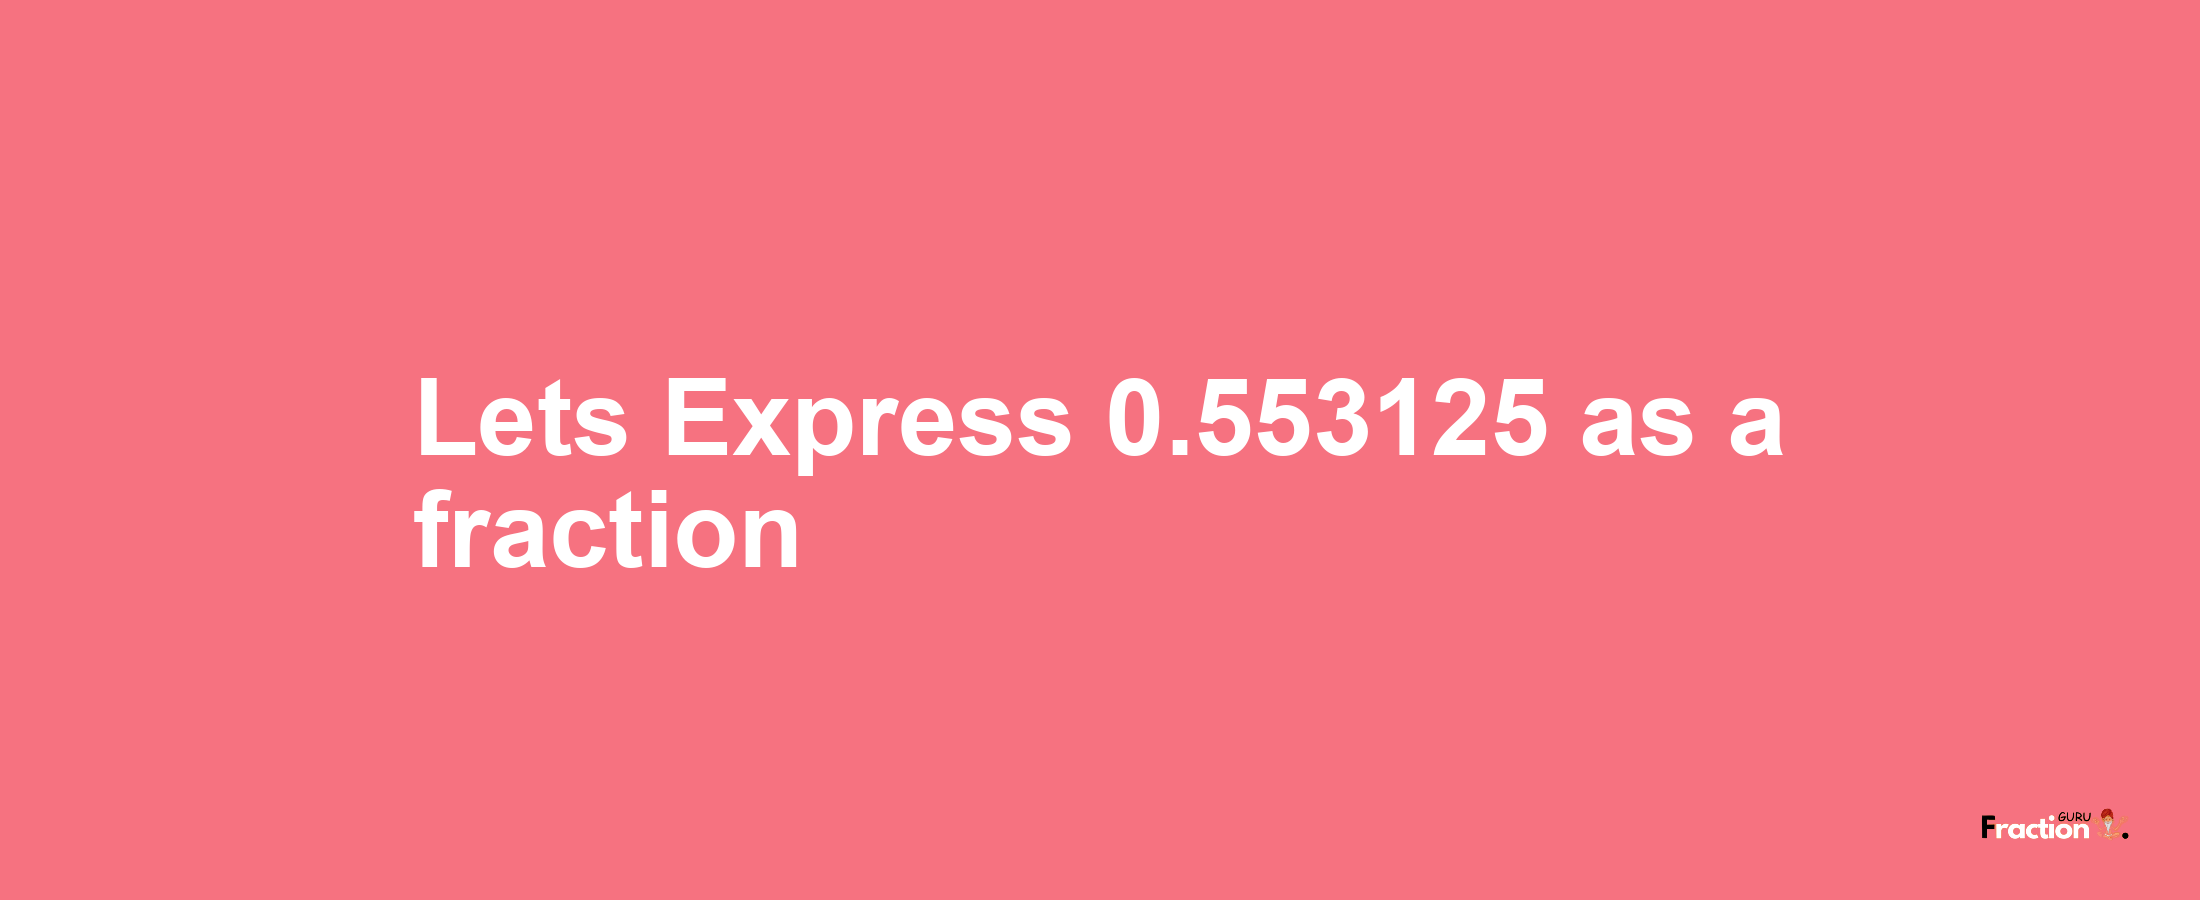 Lets Express 0.553125 as afraction